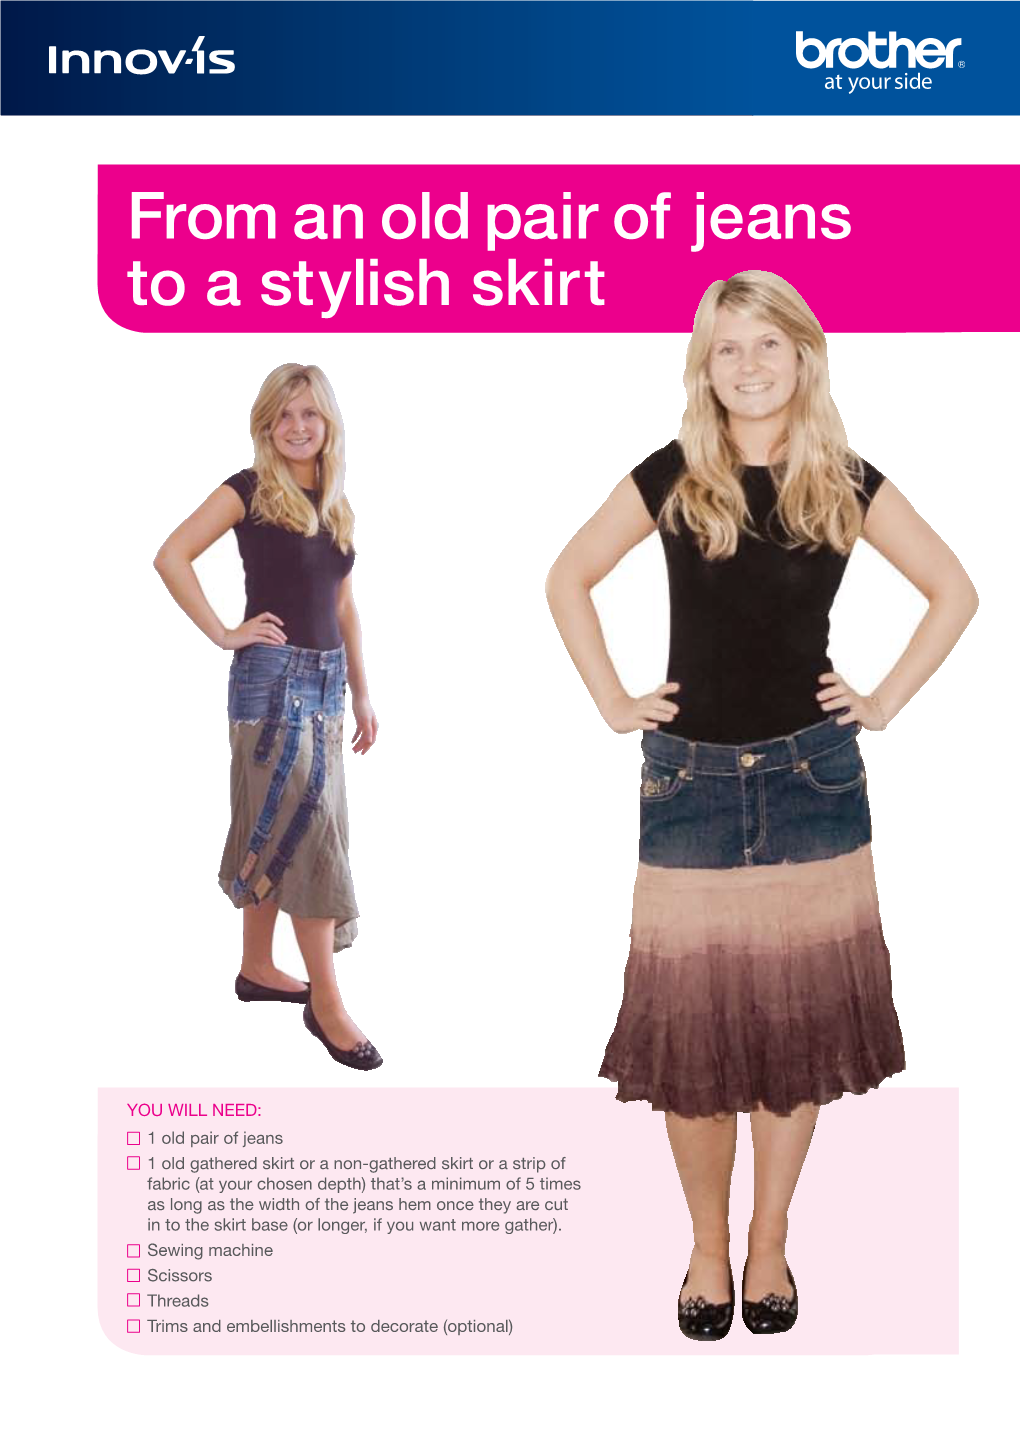 From an Old Pair of Jeans to a Stylish Skirt